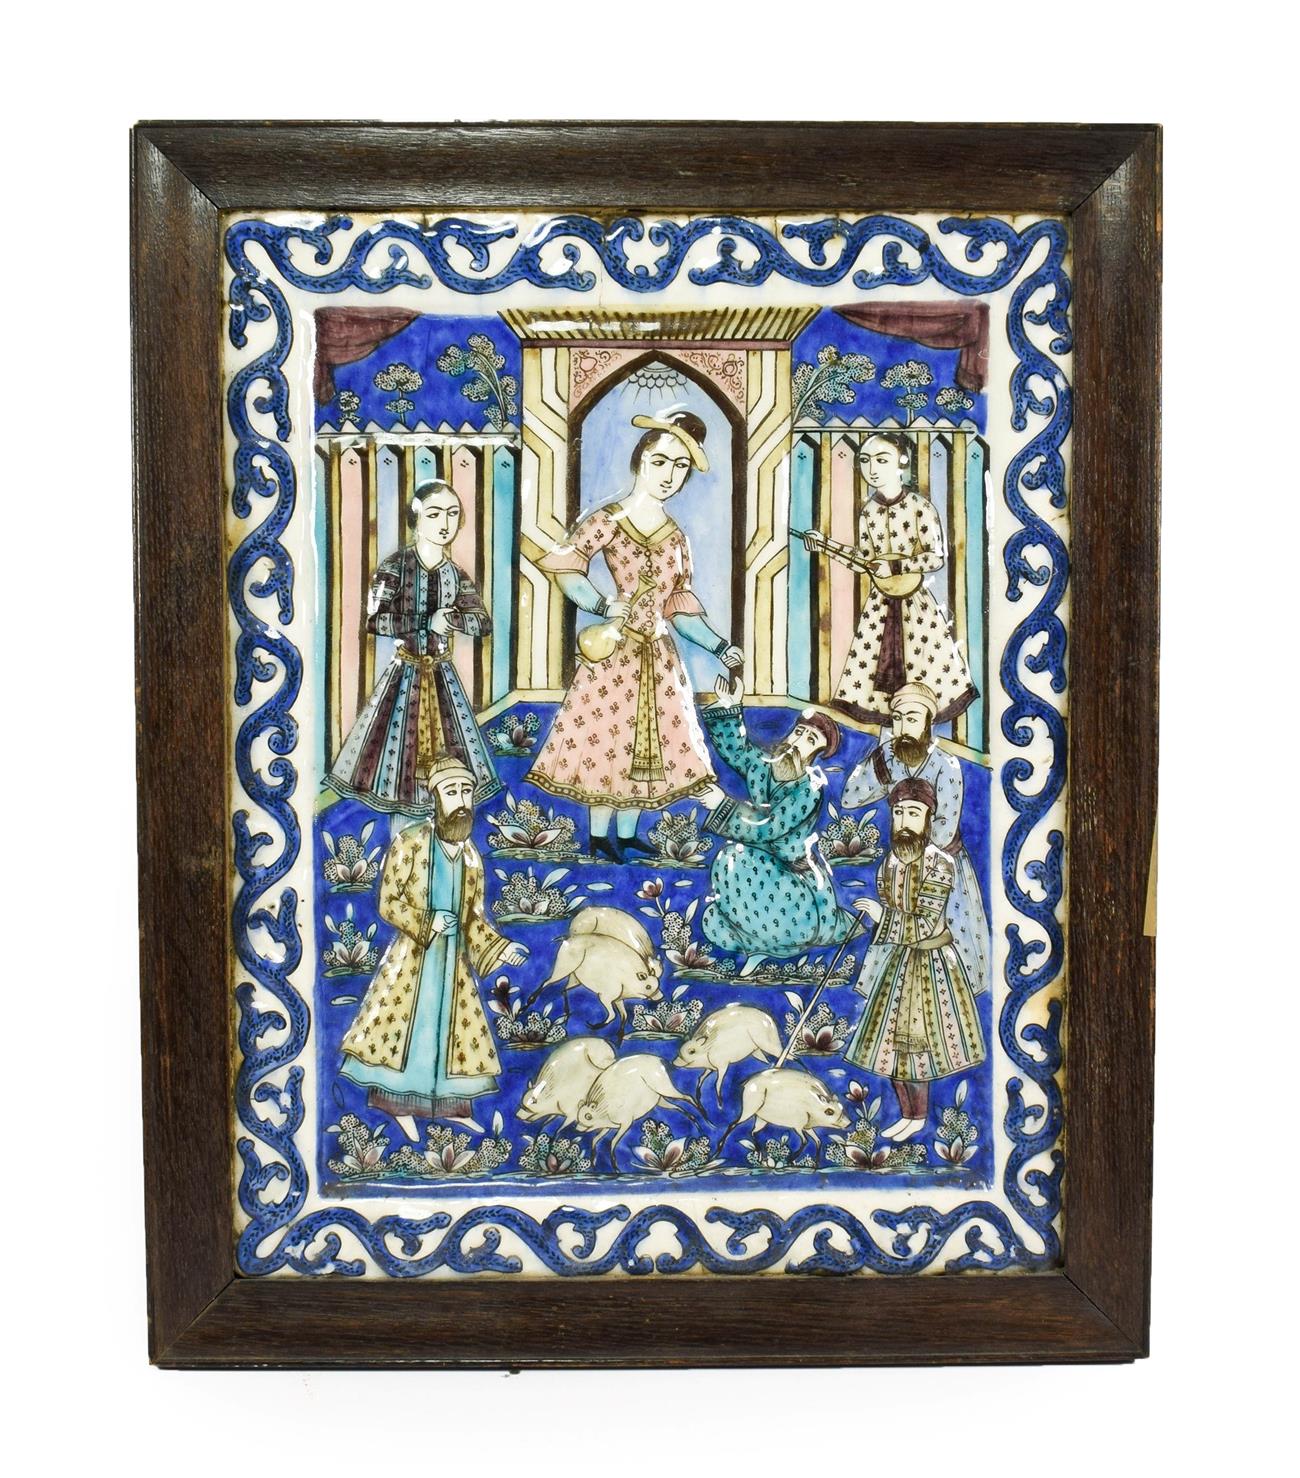 Lot 114 - A Large Qajar Pottery Tile, circa 1880, moulded and painted with Sheikh Sana'an and the...